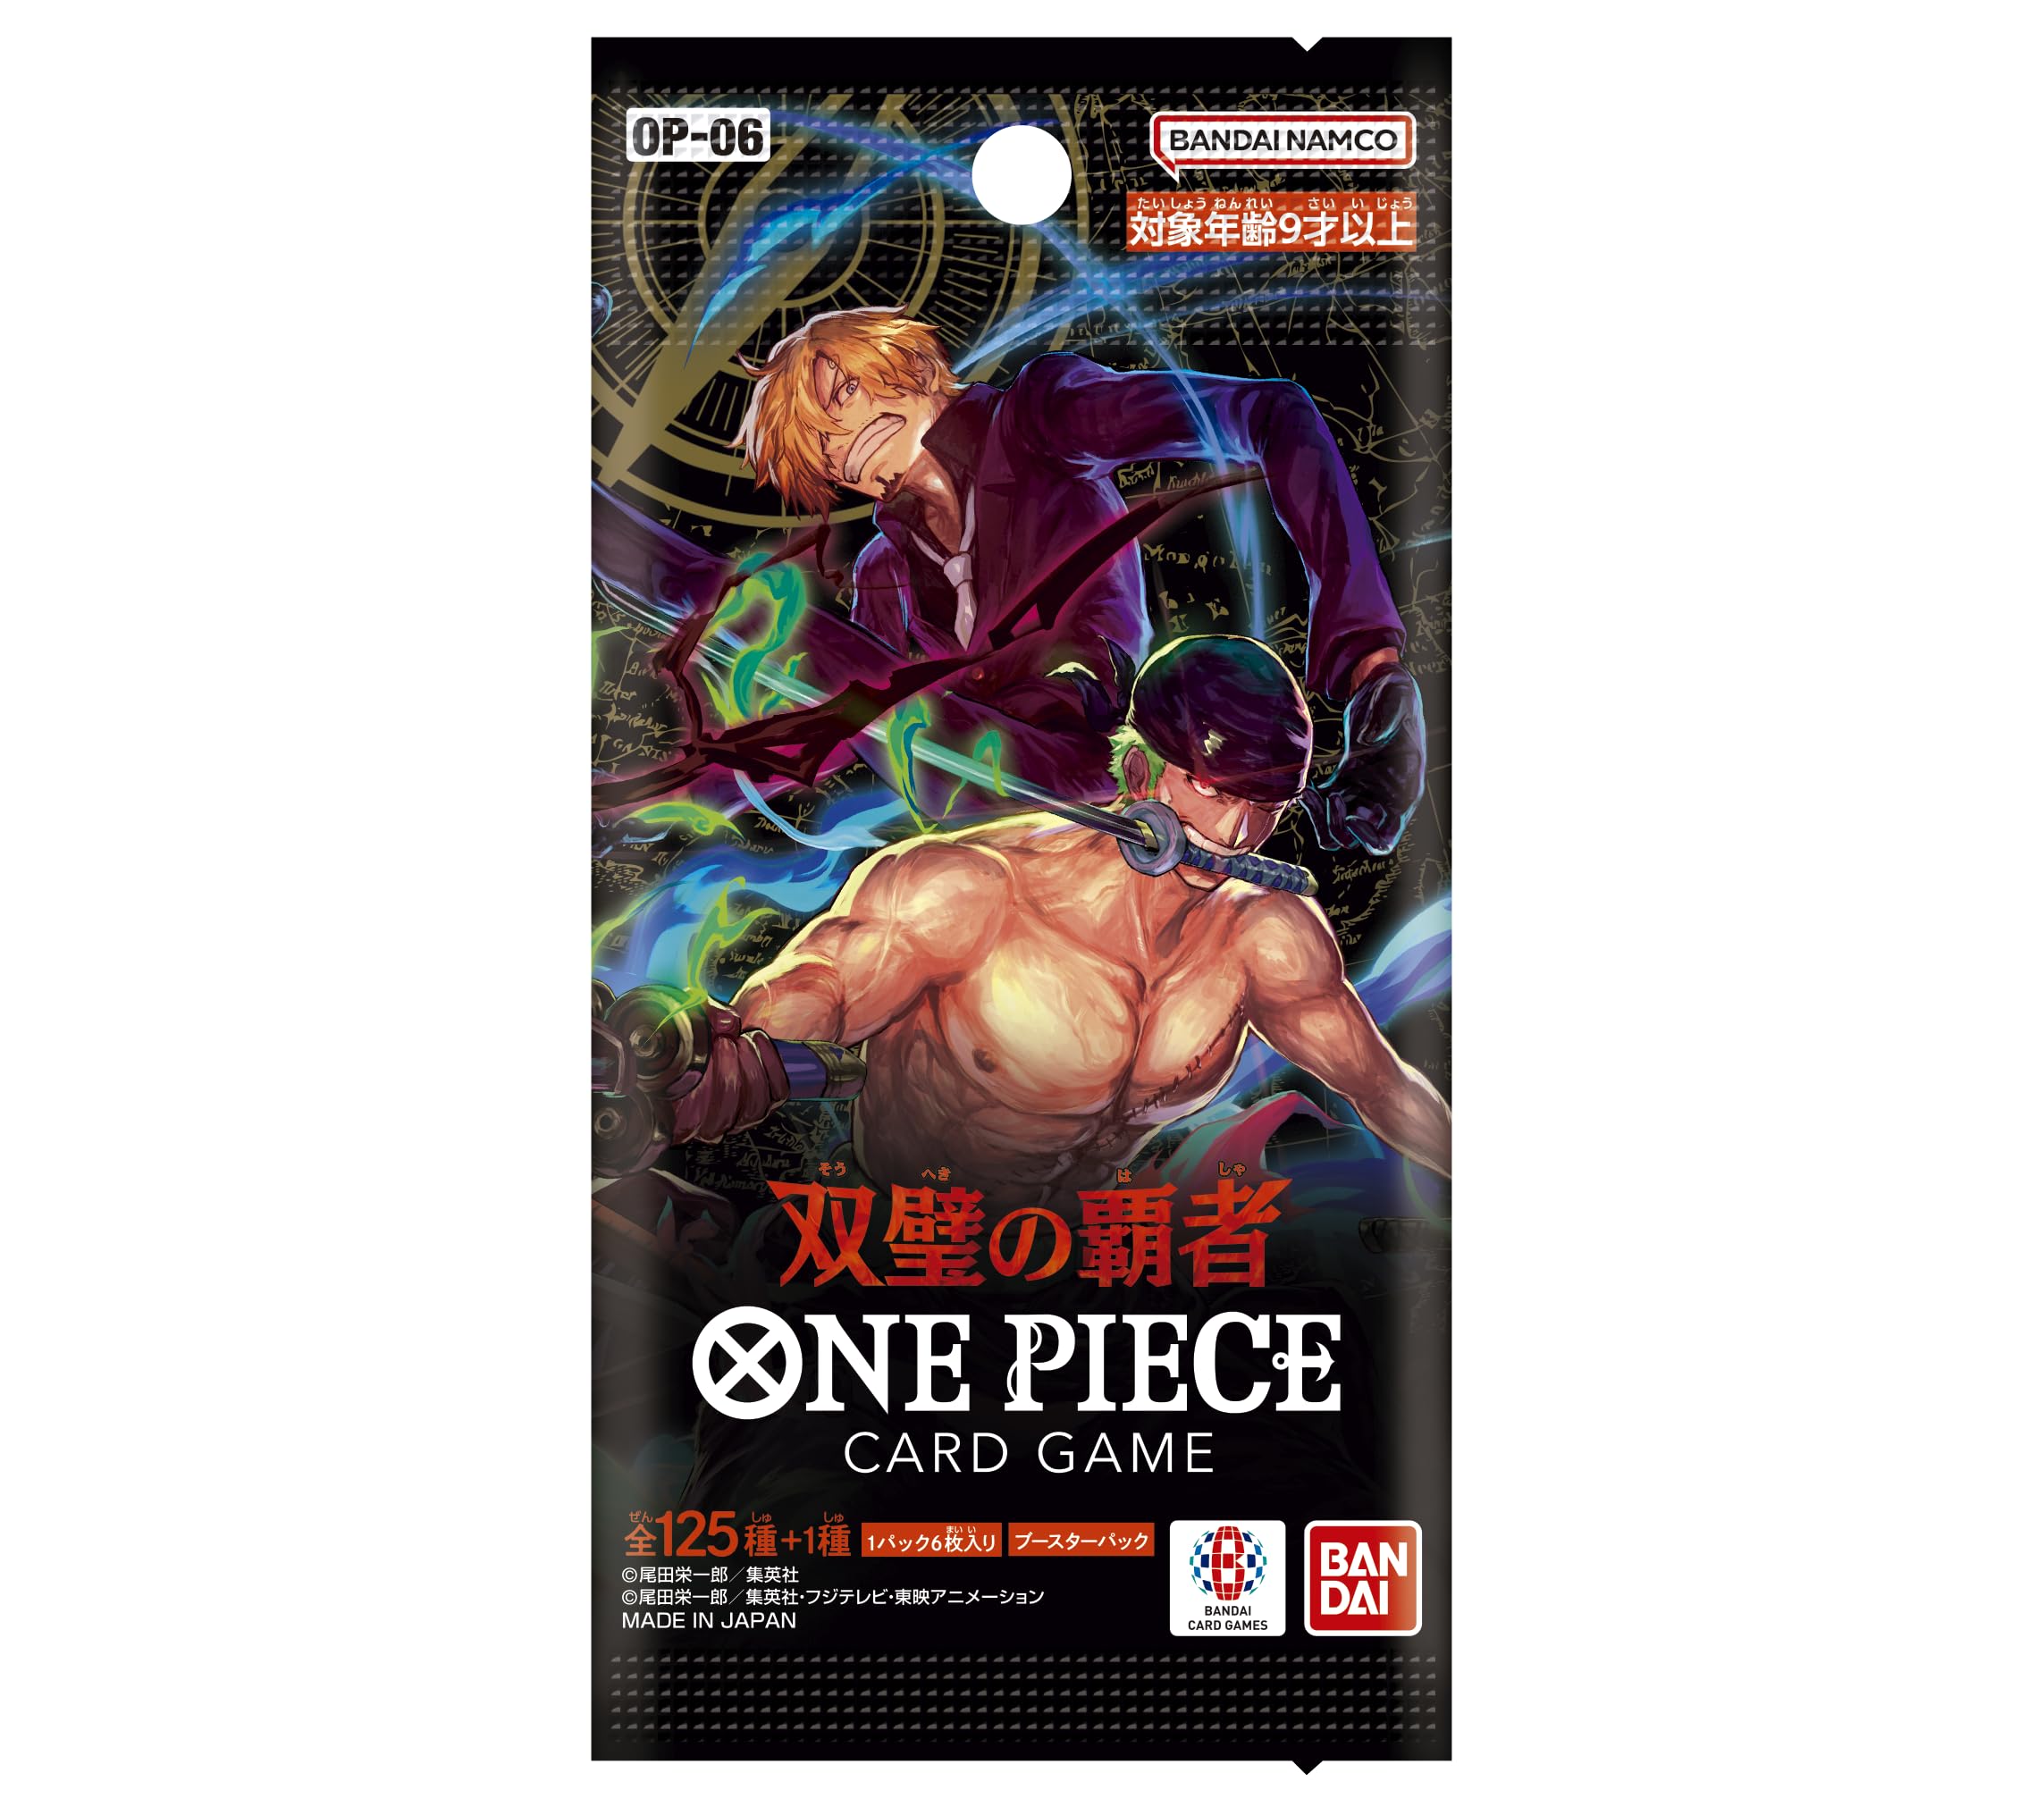 One Piece TCG Twin Champions OP-06 Booster Box (Japanese) - Miraj Trading